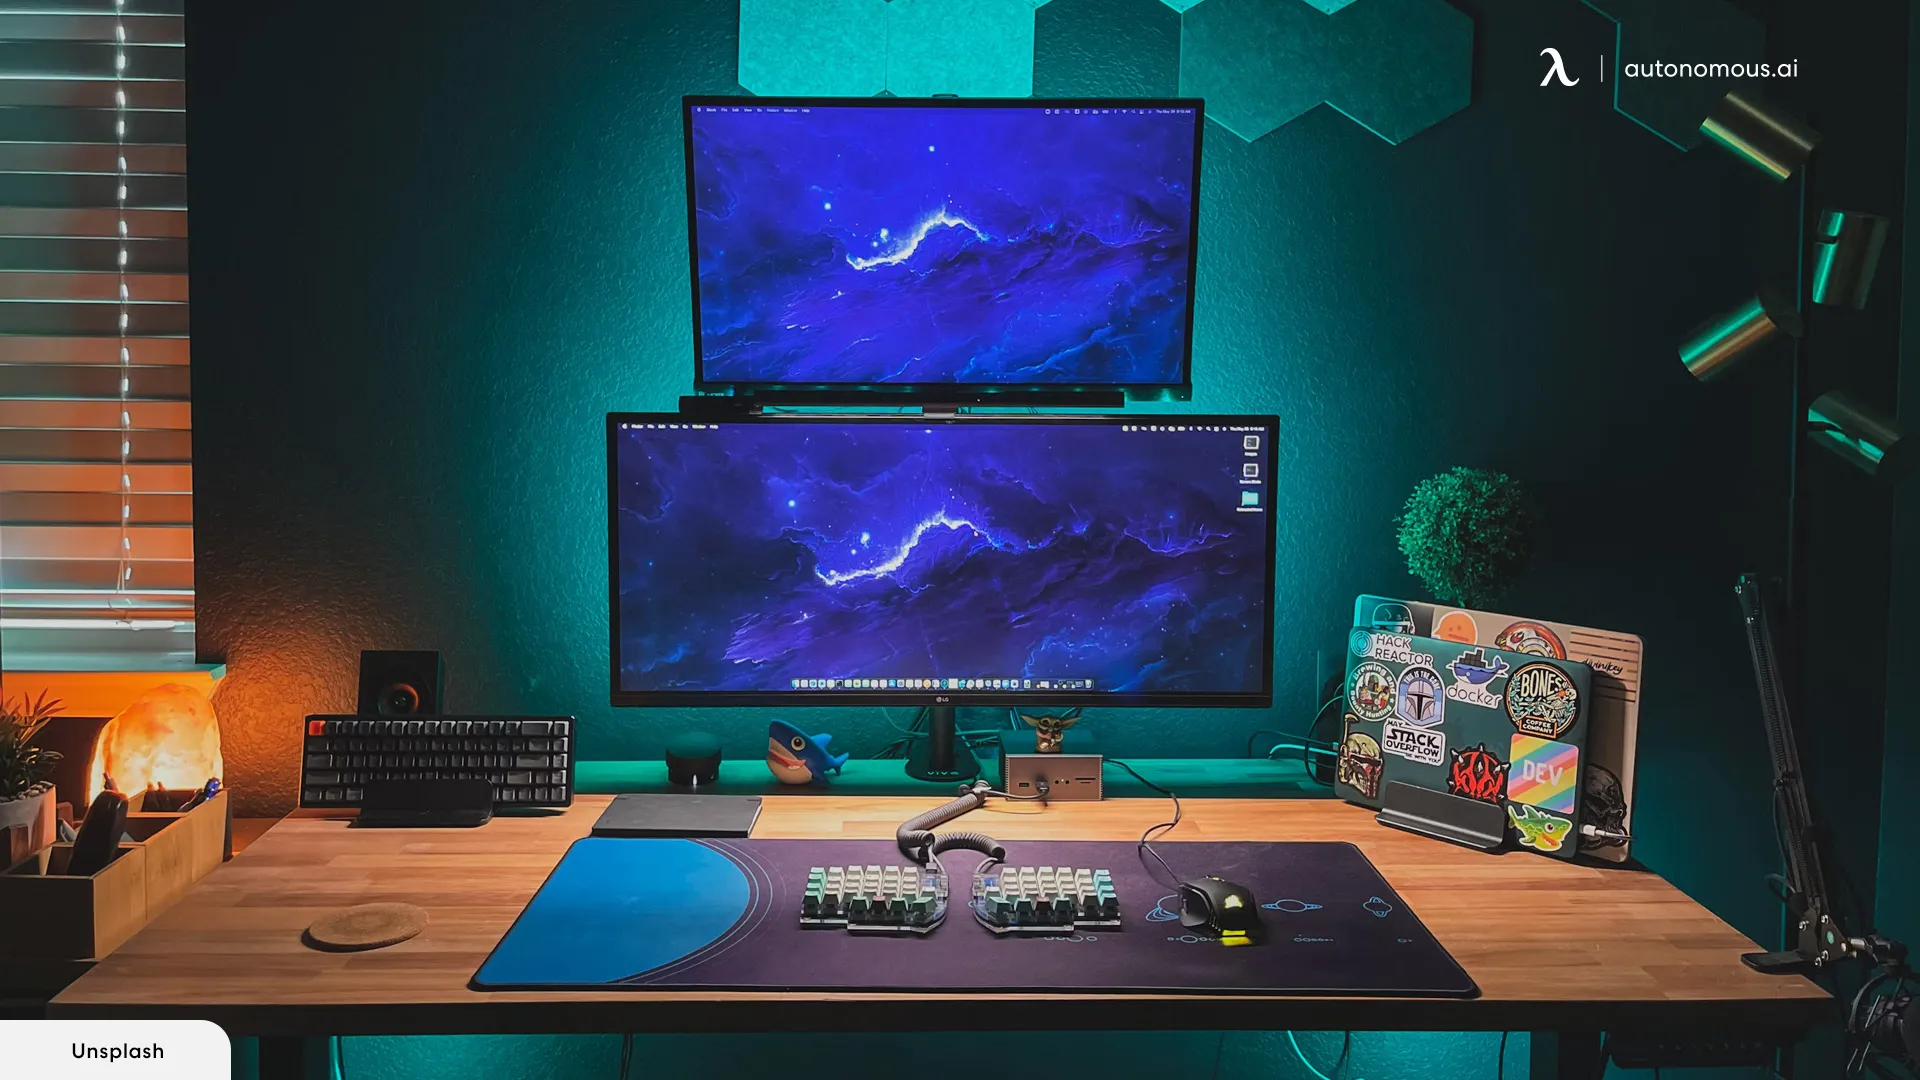 What Are the Pros and Cons of Creating a Cool Gaming Setup